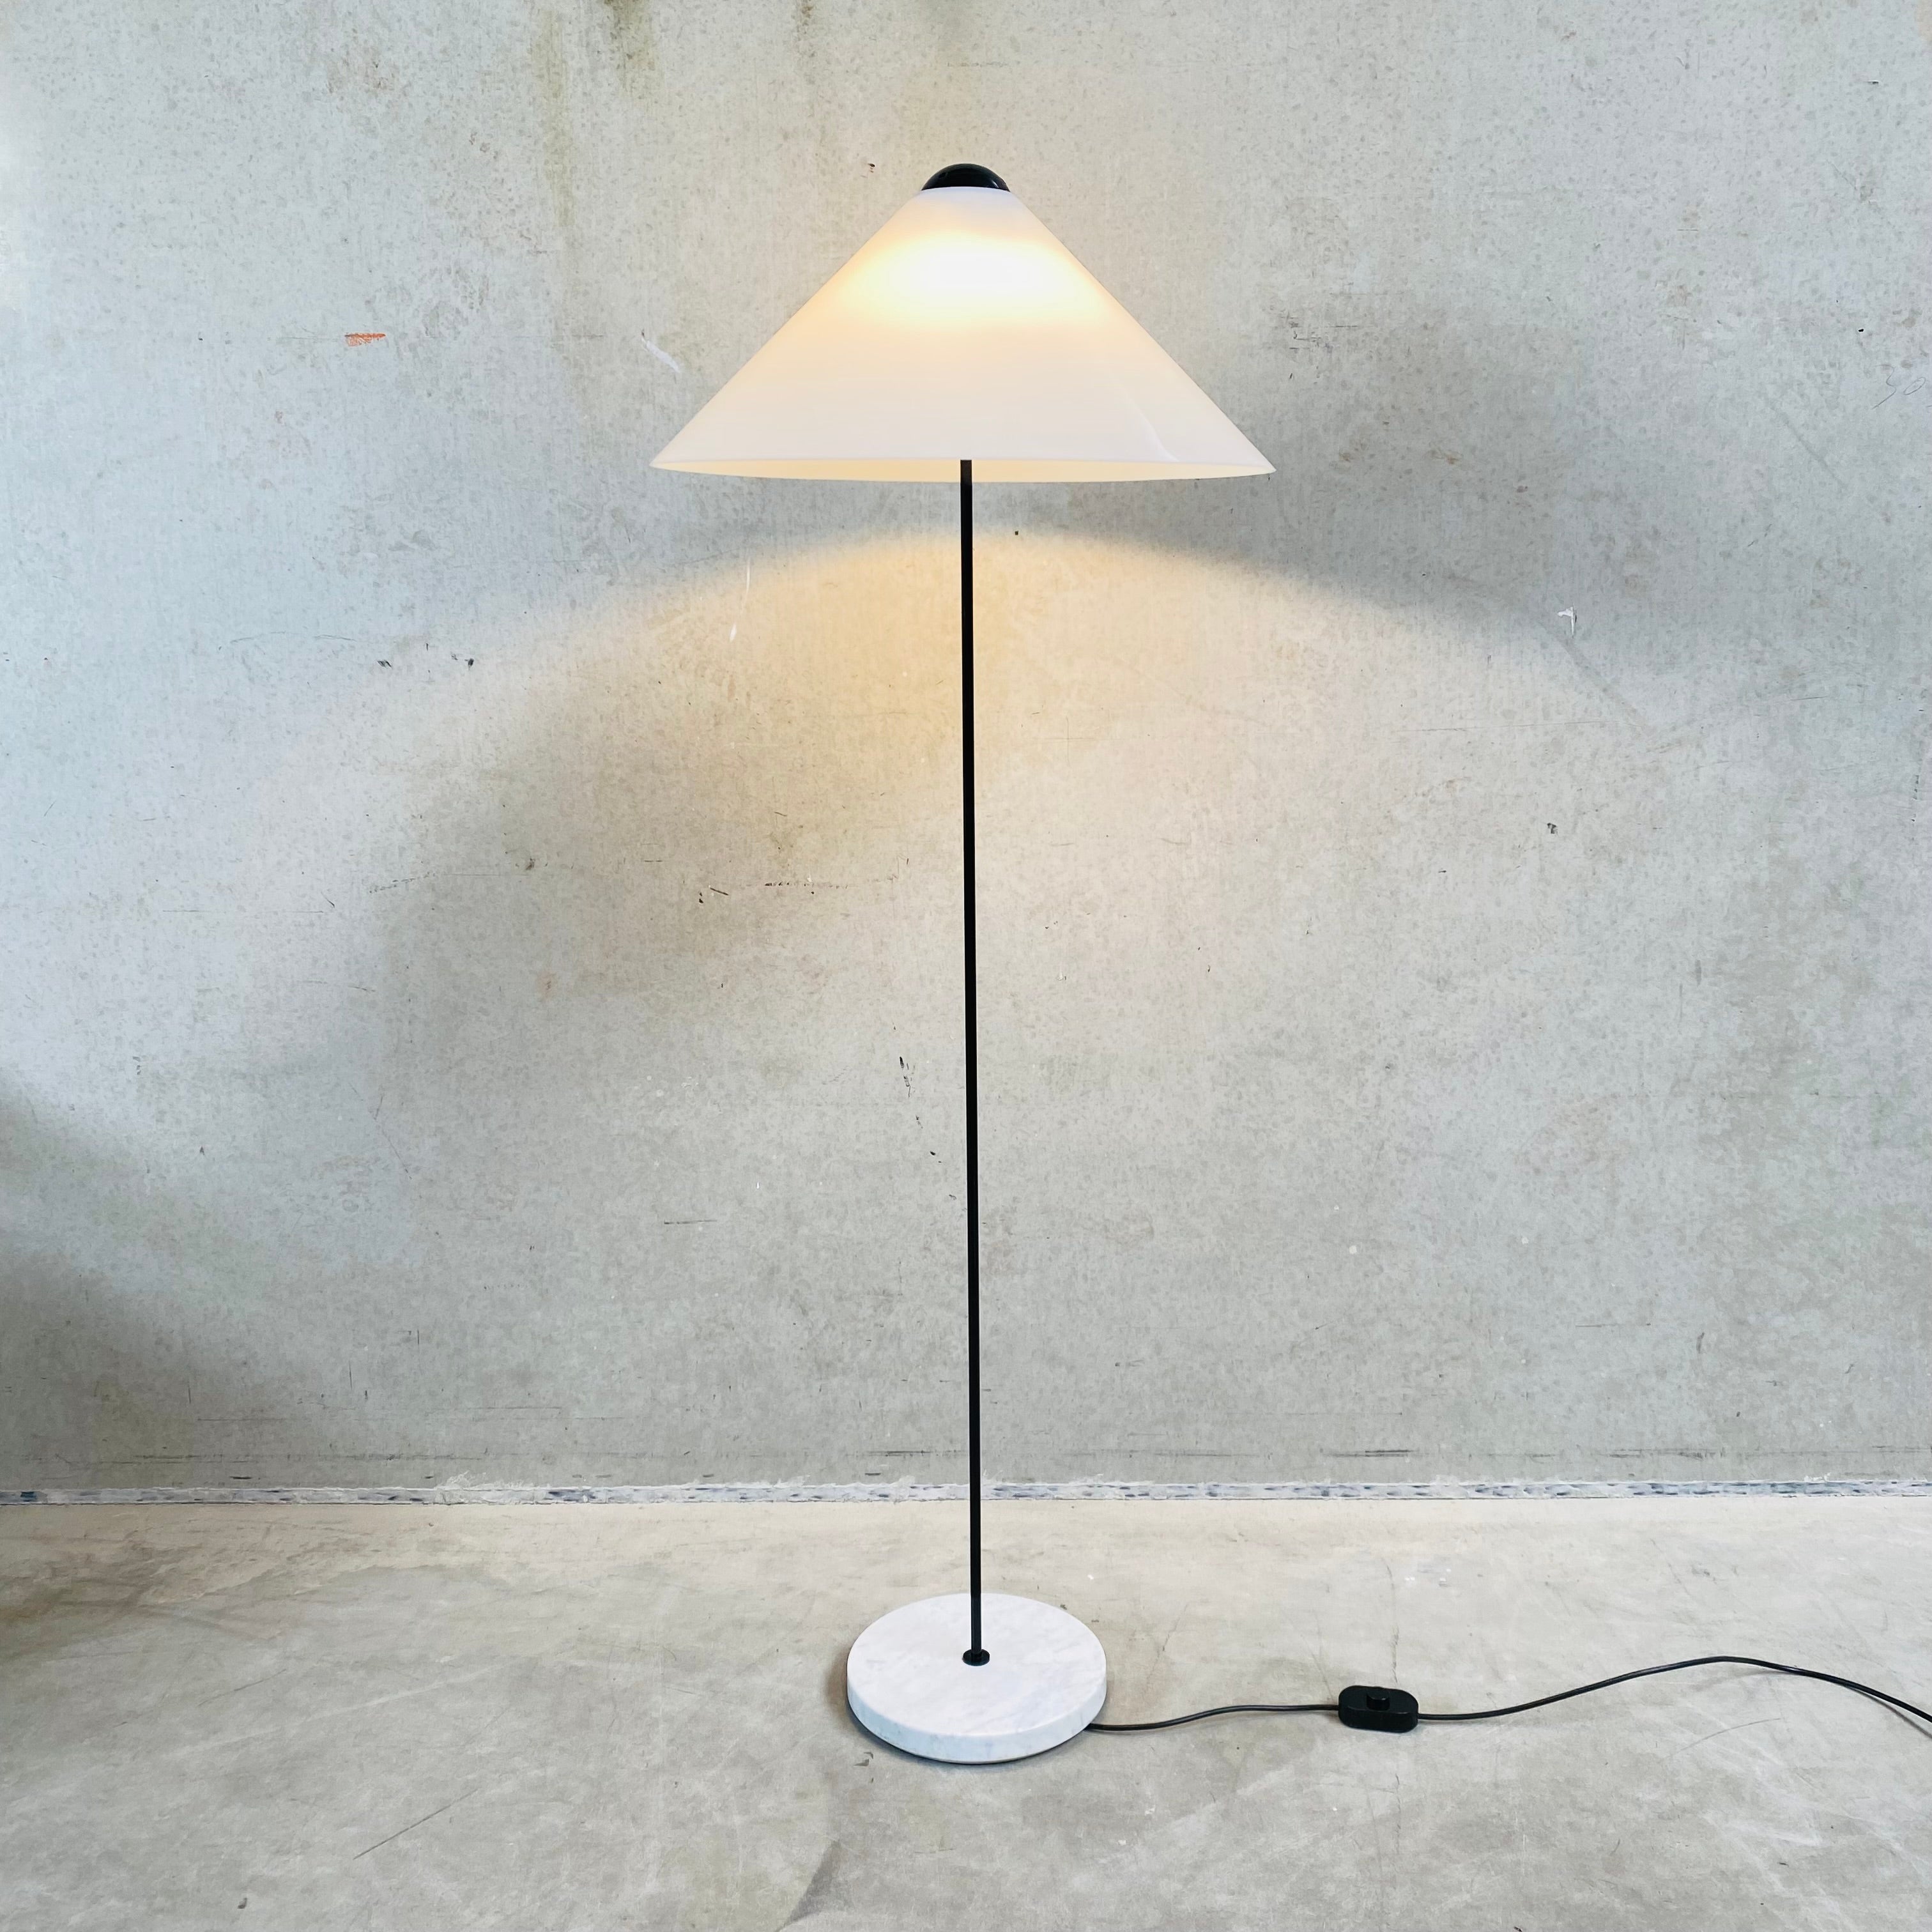 Mid-Century Floor Lamp "Snow" by Vico Magistretti for Oluce Italy 1970 For Sale